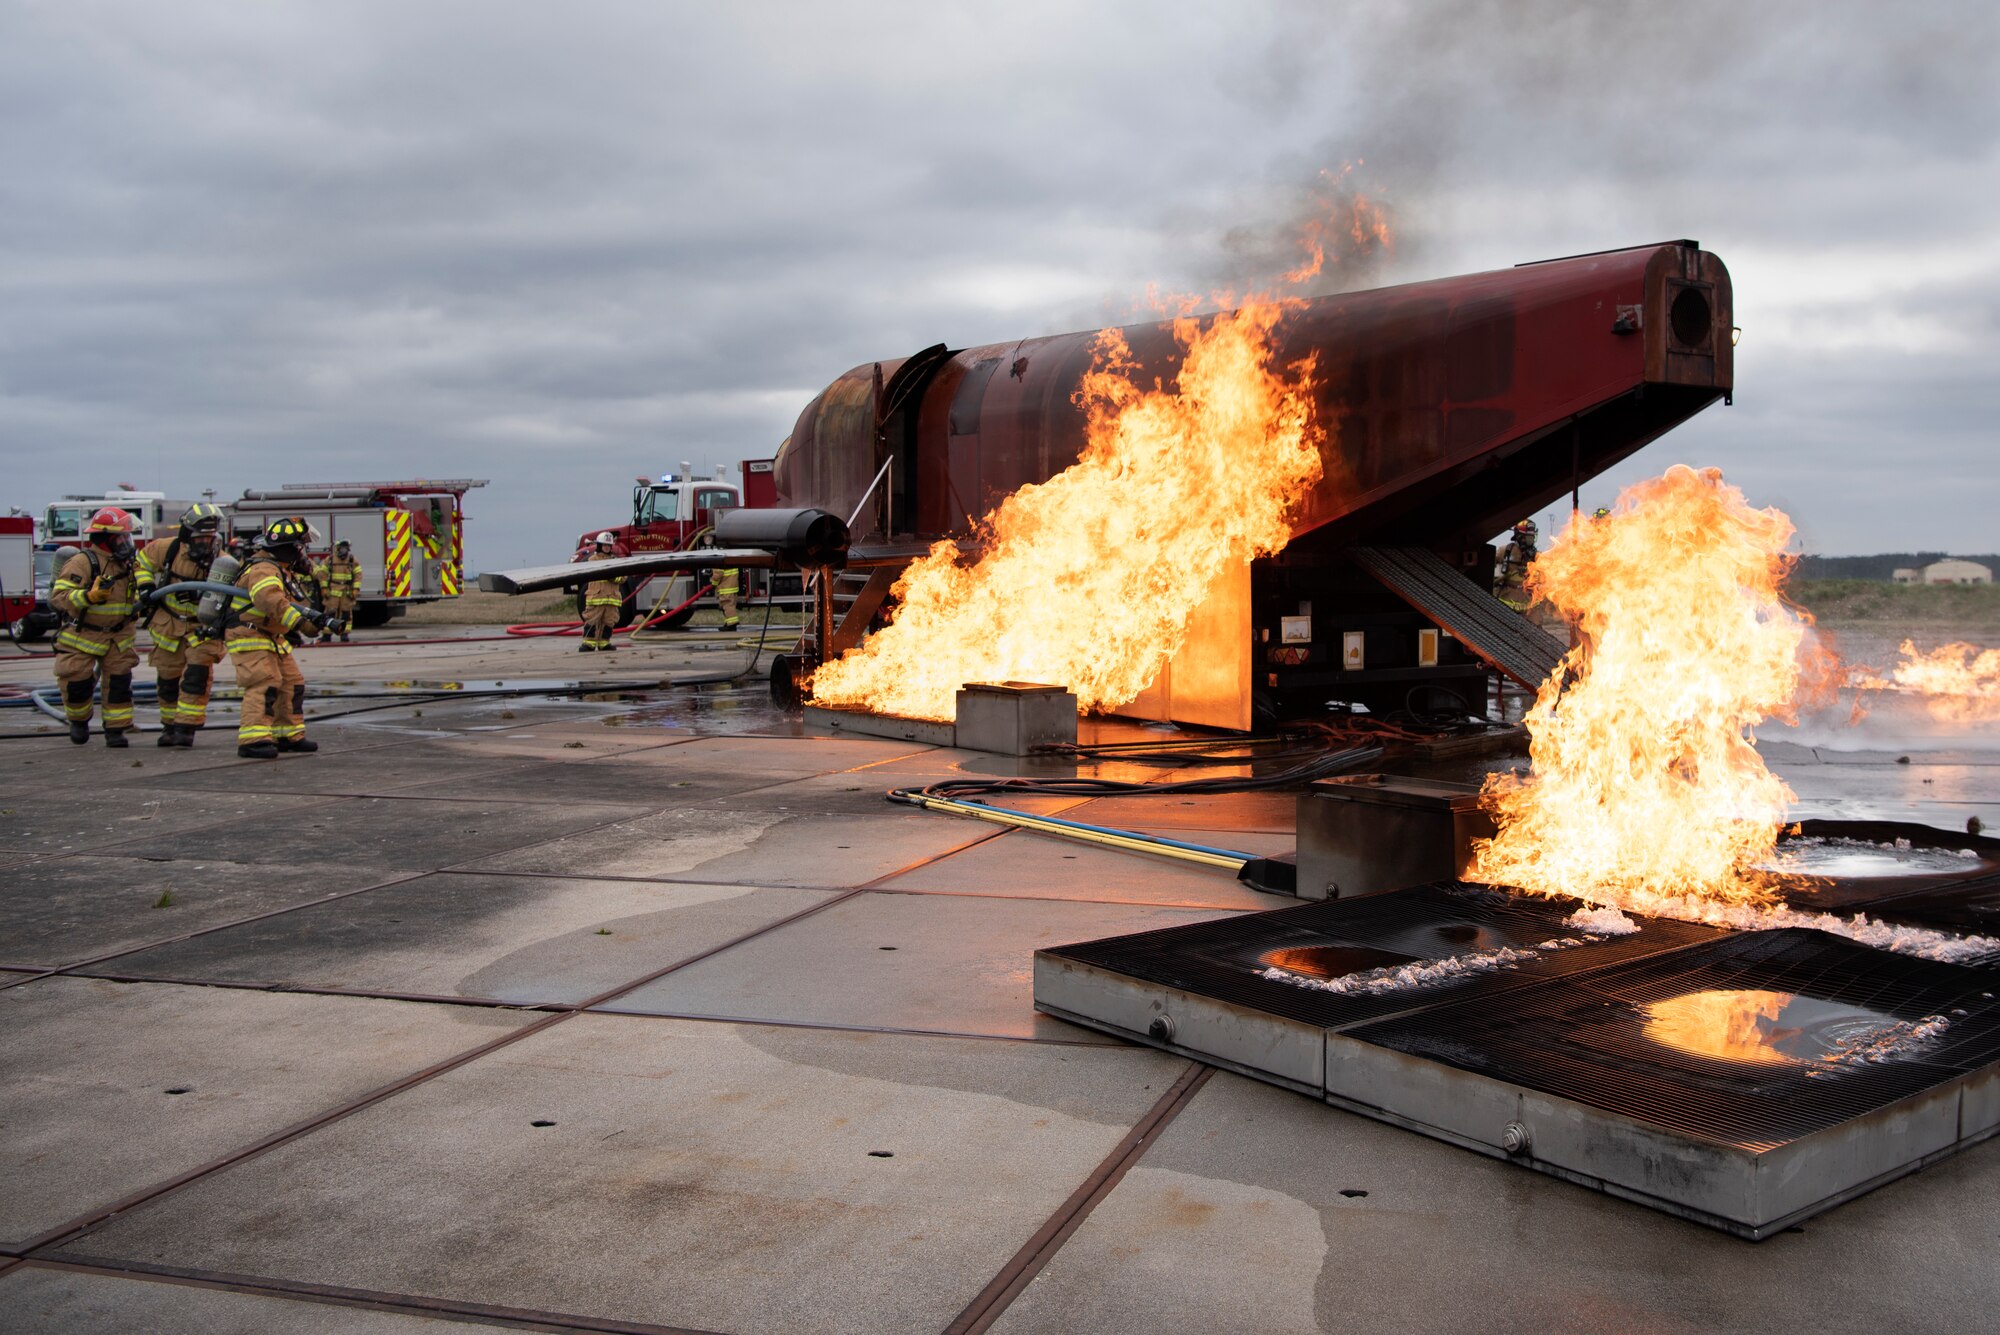 U.S. Air Force Airmen assigned to the 52nd Civil Engineer Squadron Fire Department conduct live-fire aircraft burn training at Spangdahlem Air Base, Germany, March 26, 2019. Live-fire exercises help firefighters learn how to extinguish engine or fuel pool fires. (U.S. Air Force photo by Airman 1st Class Valerie Seelye)